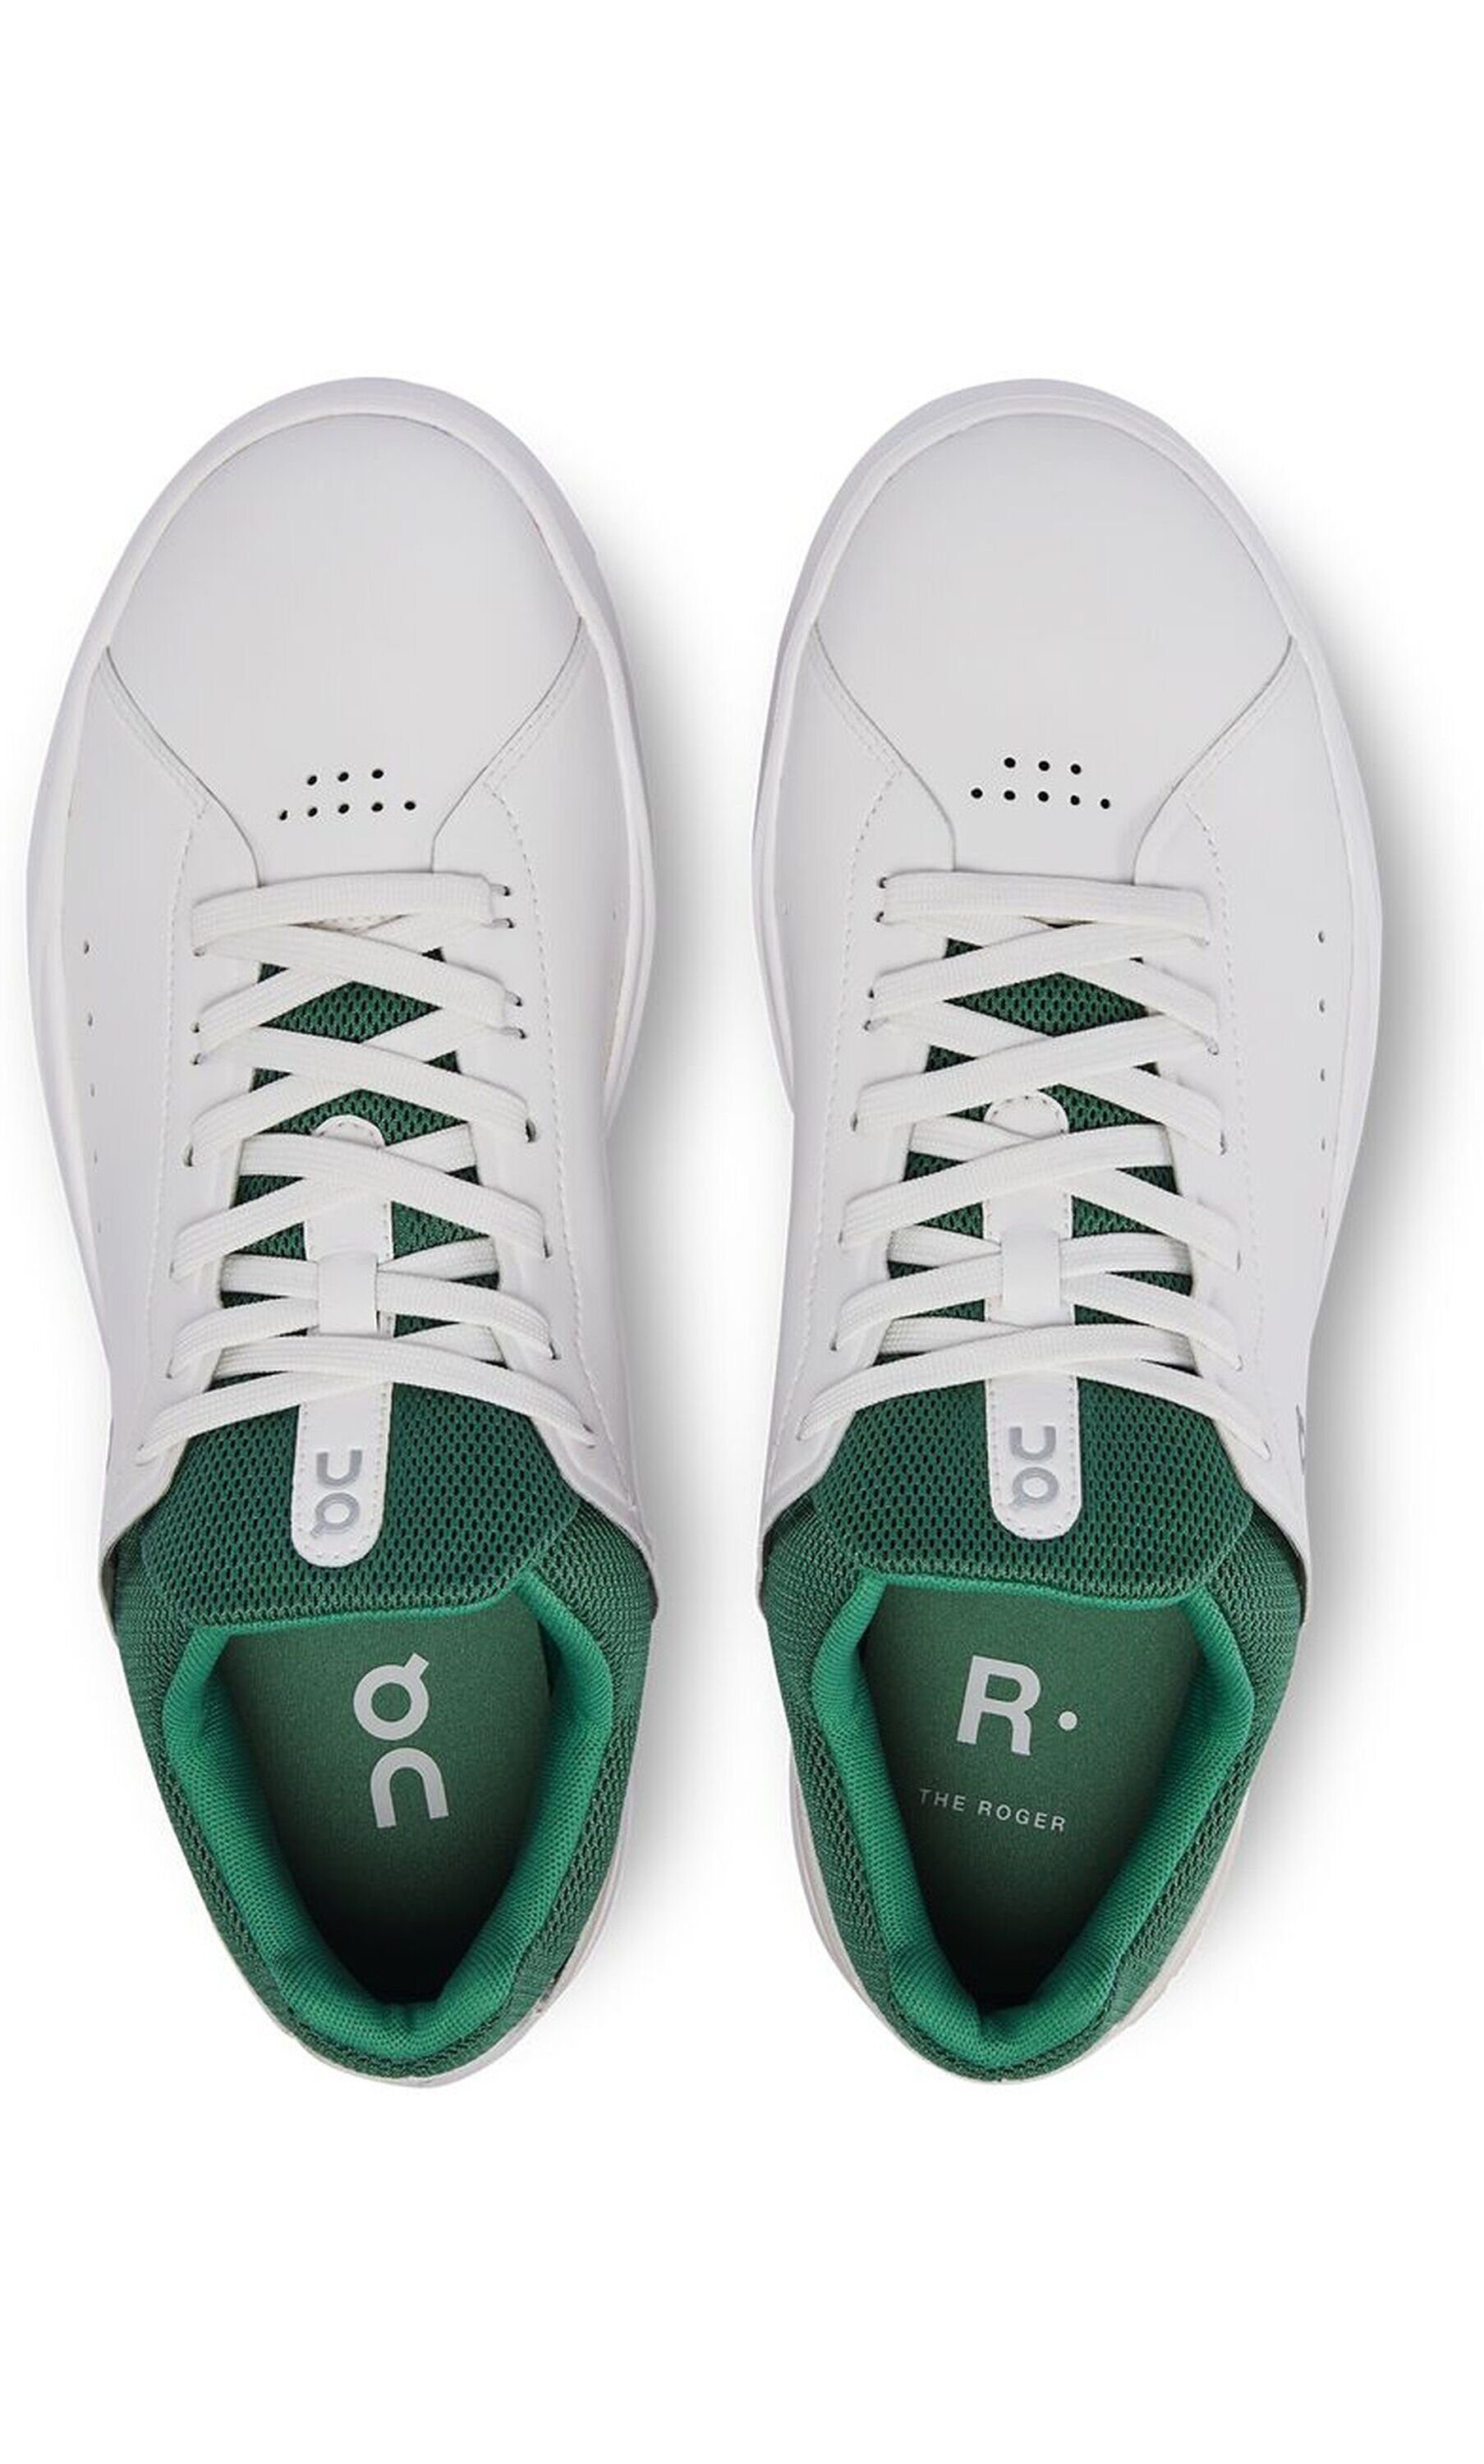 ON RUNNING 98515 White THE (2-tlg) mit ROGER Advantage Green CloudTec-Außensohle / Sneaker